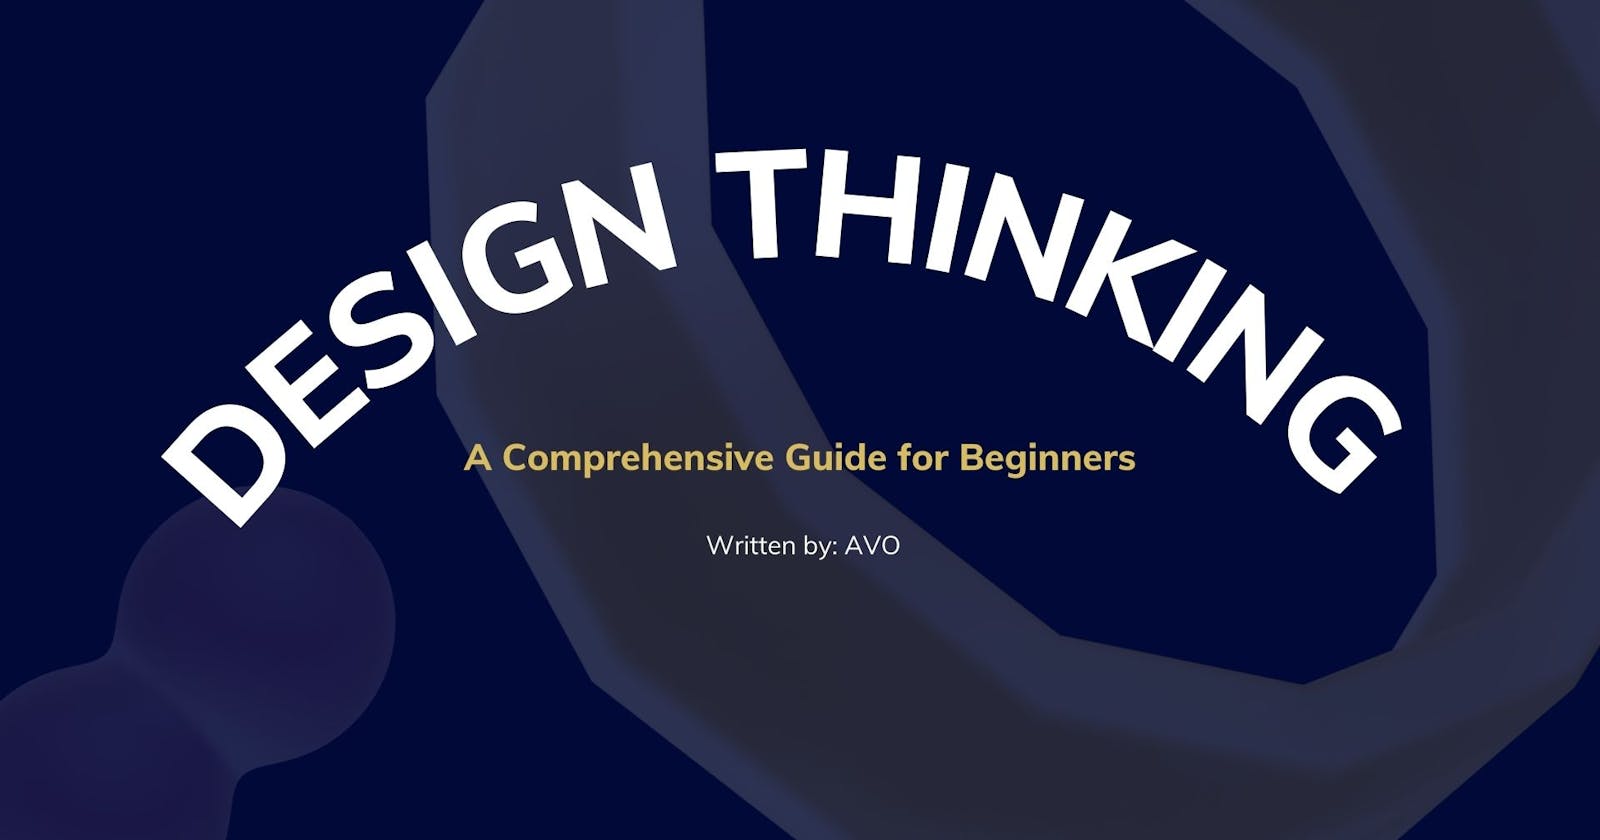 Design Thinking: A Comprehensive Guide for Beginners.